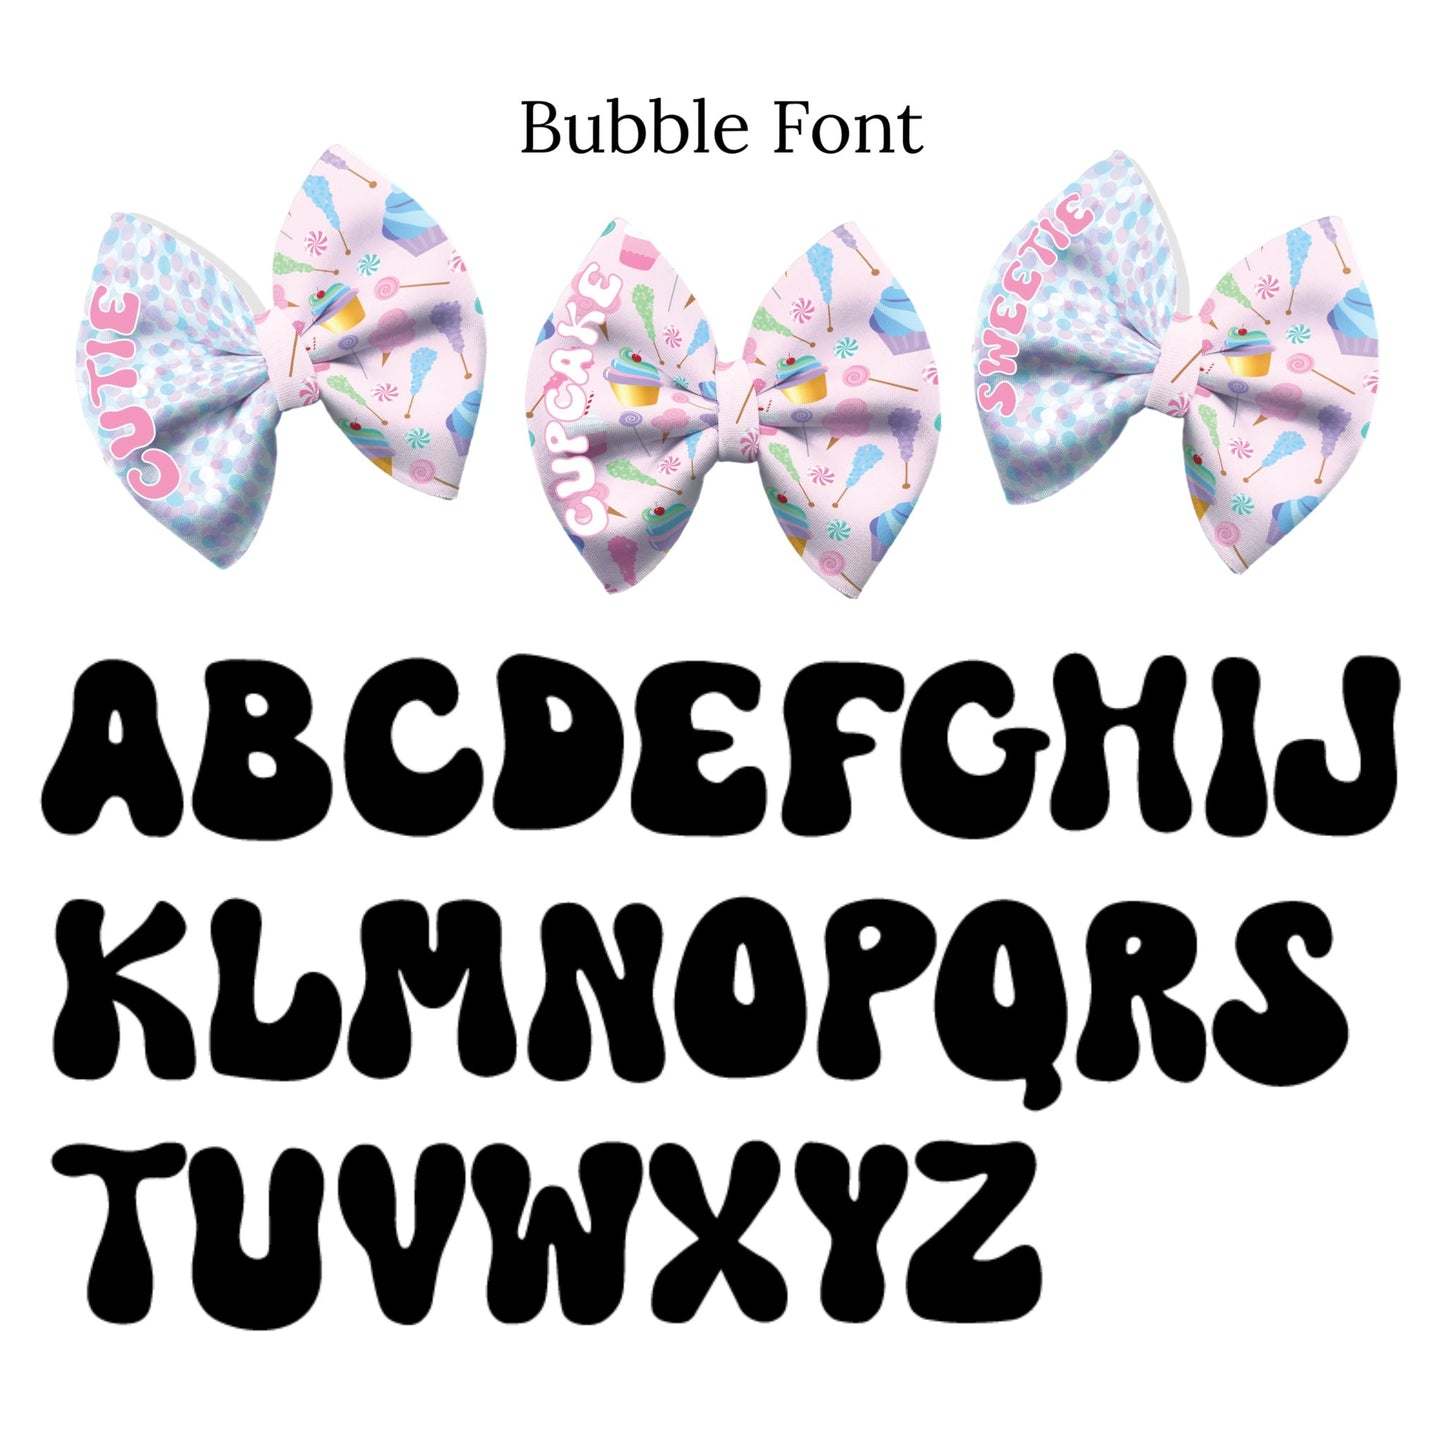 Pick Any Patterns On Our Website CUSTOM Pinch FABRIC Bows - DIY - PIPS EXCLUSIVE